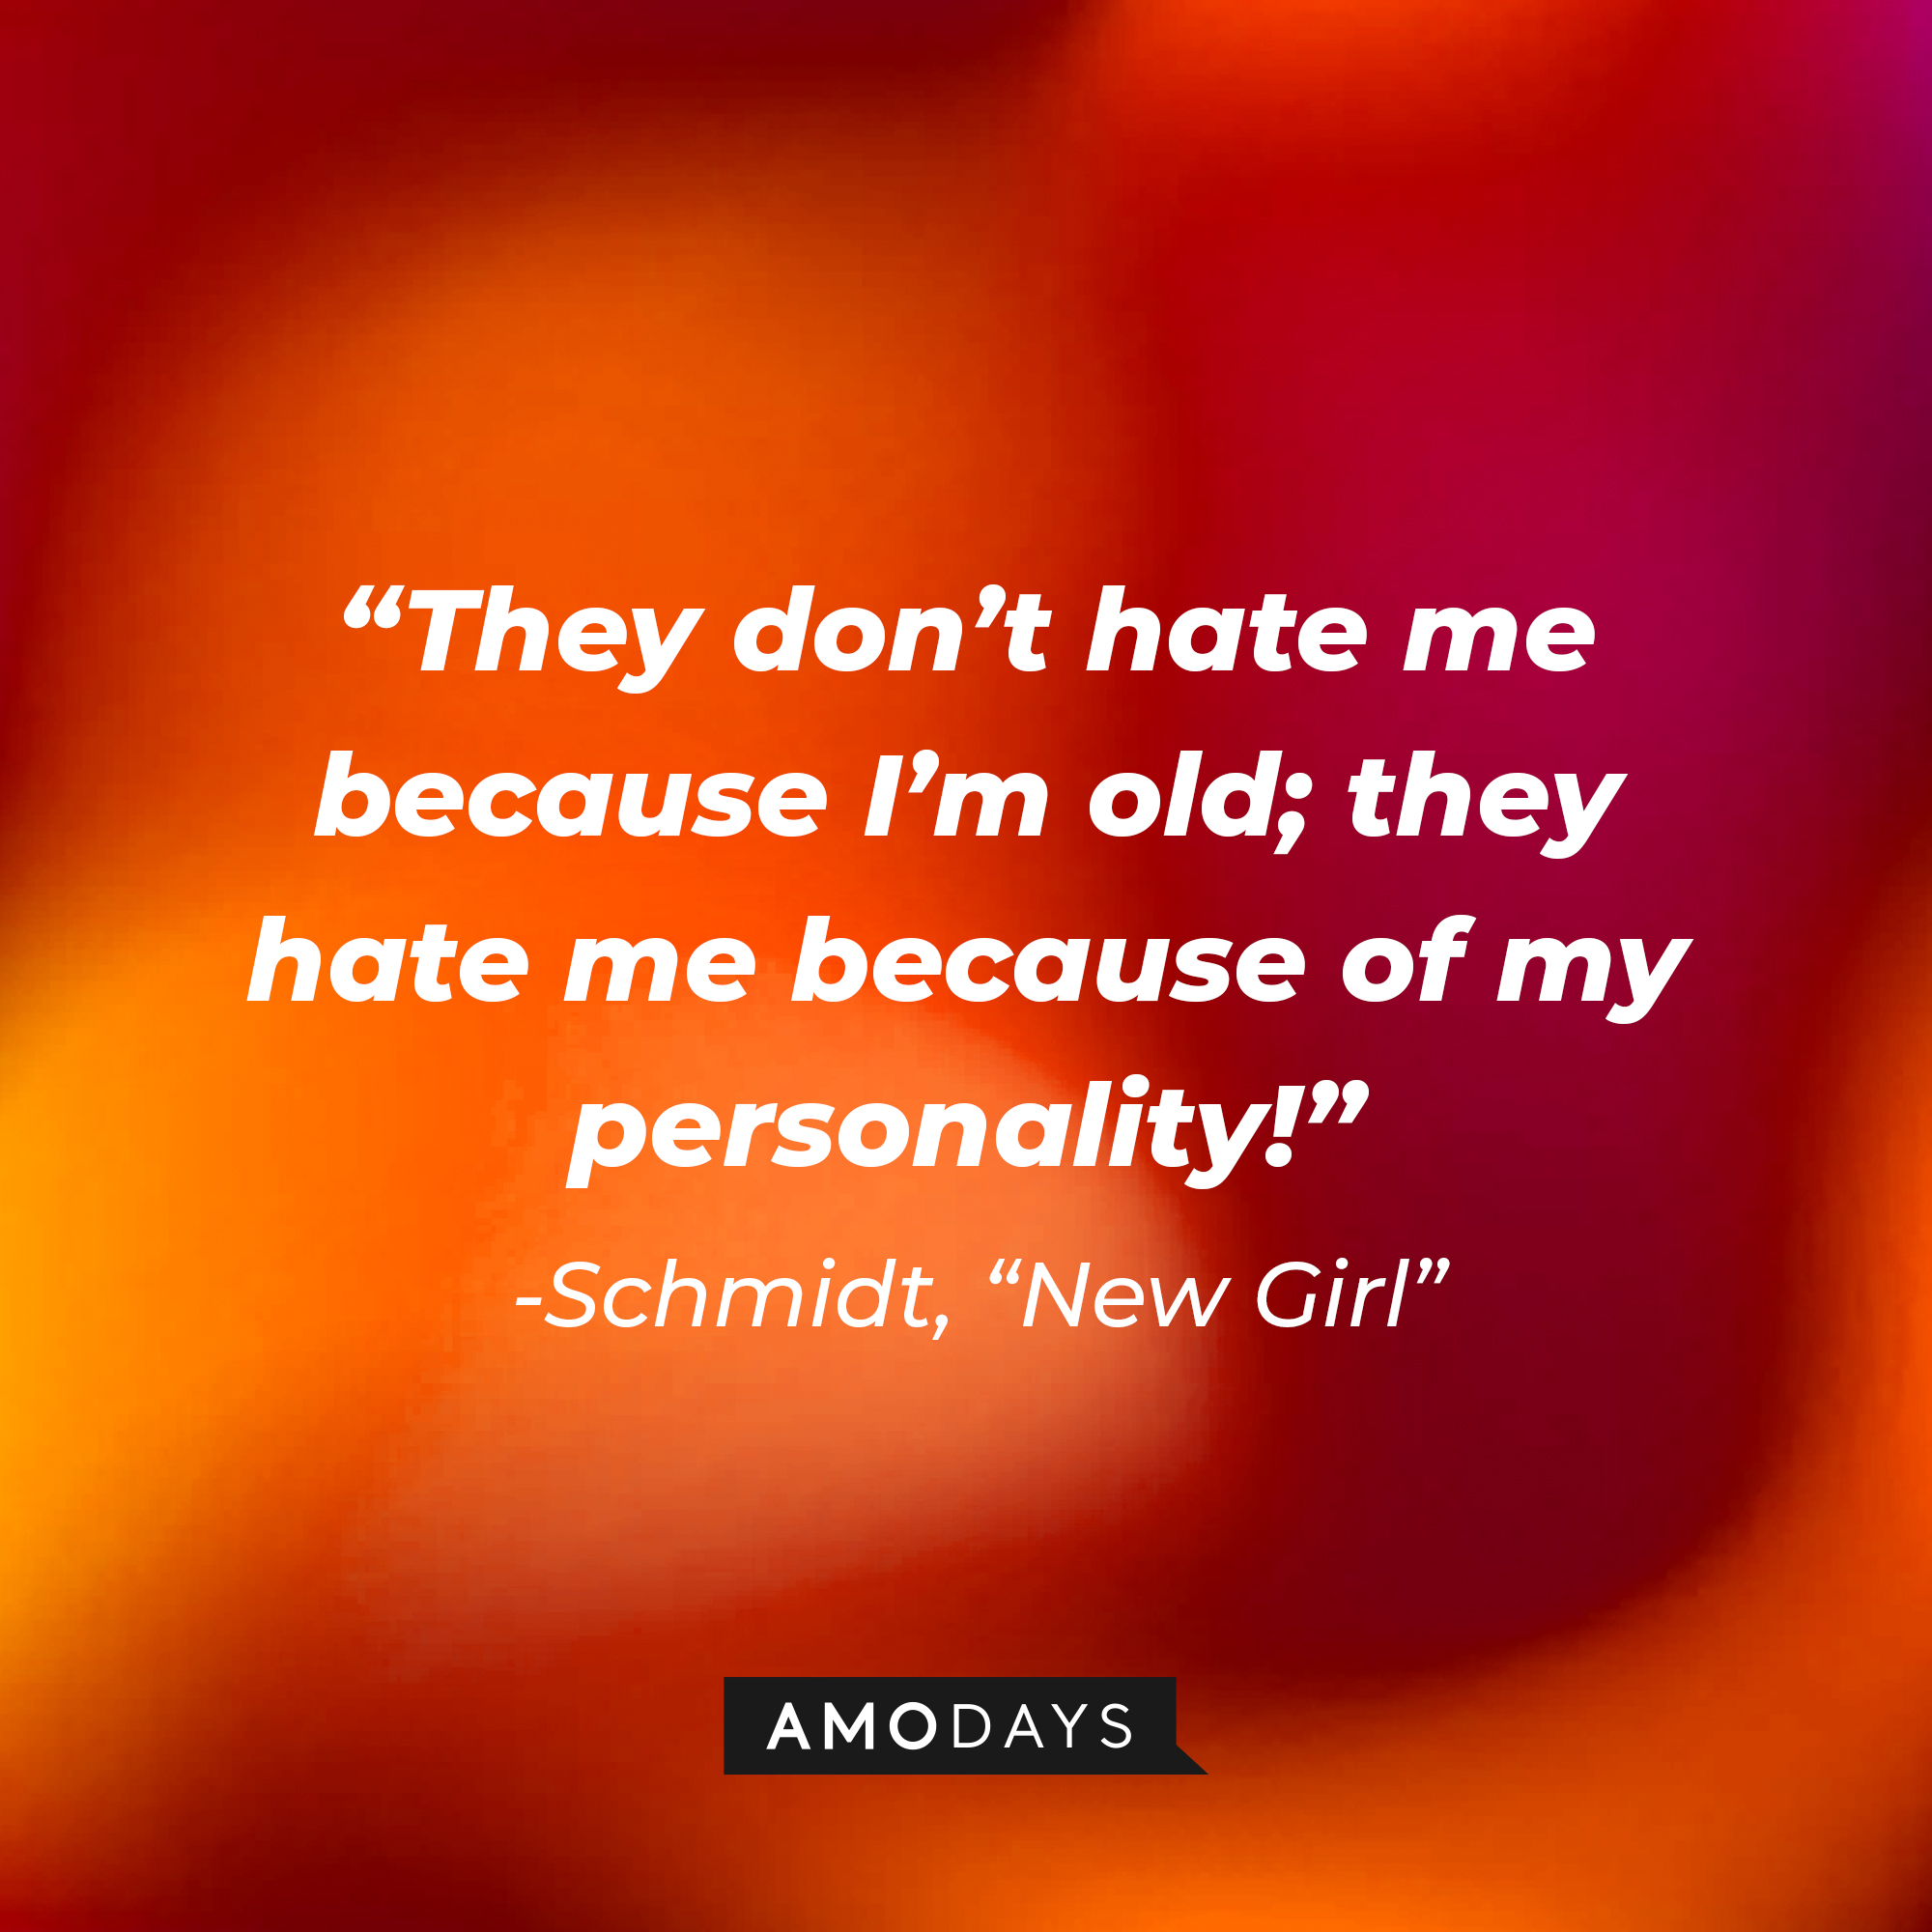 Schmidt's quote: “They don’t hate me because I’m old; they hate me because of my personality!” | Source: Amodays